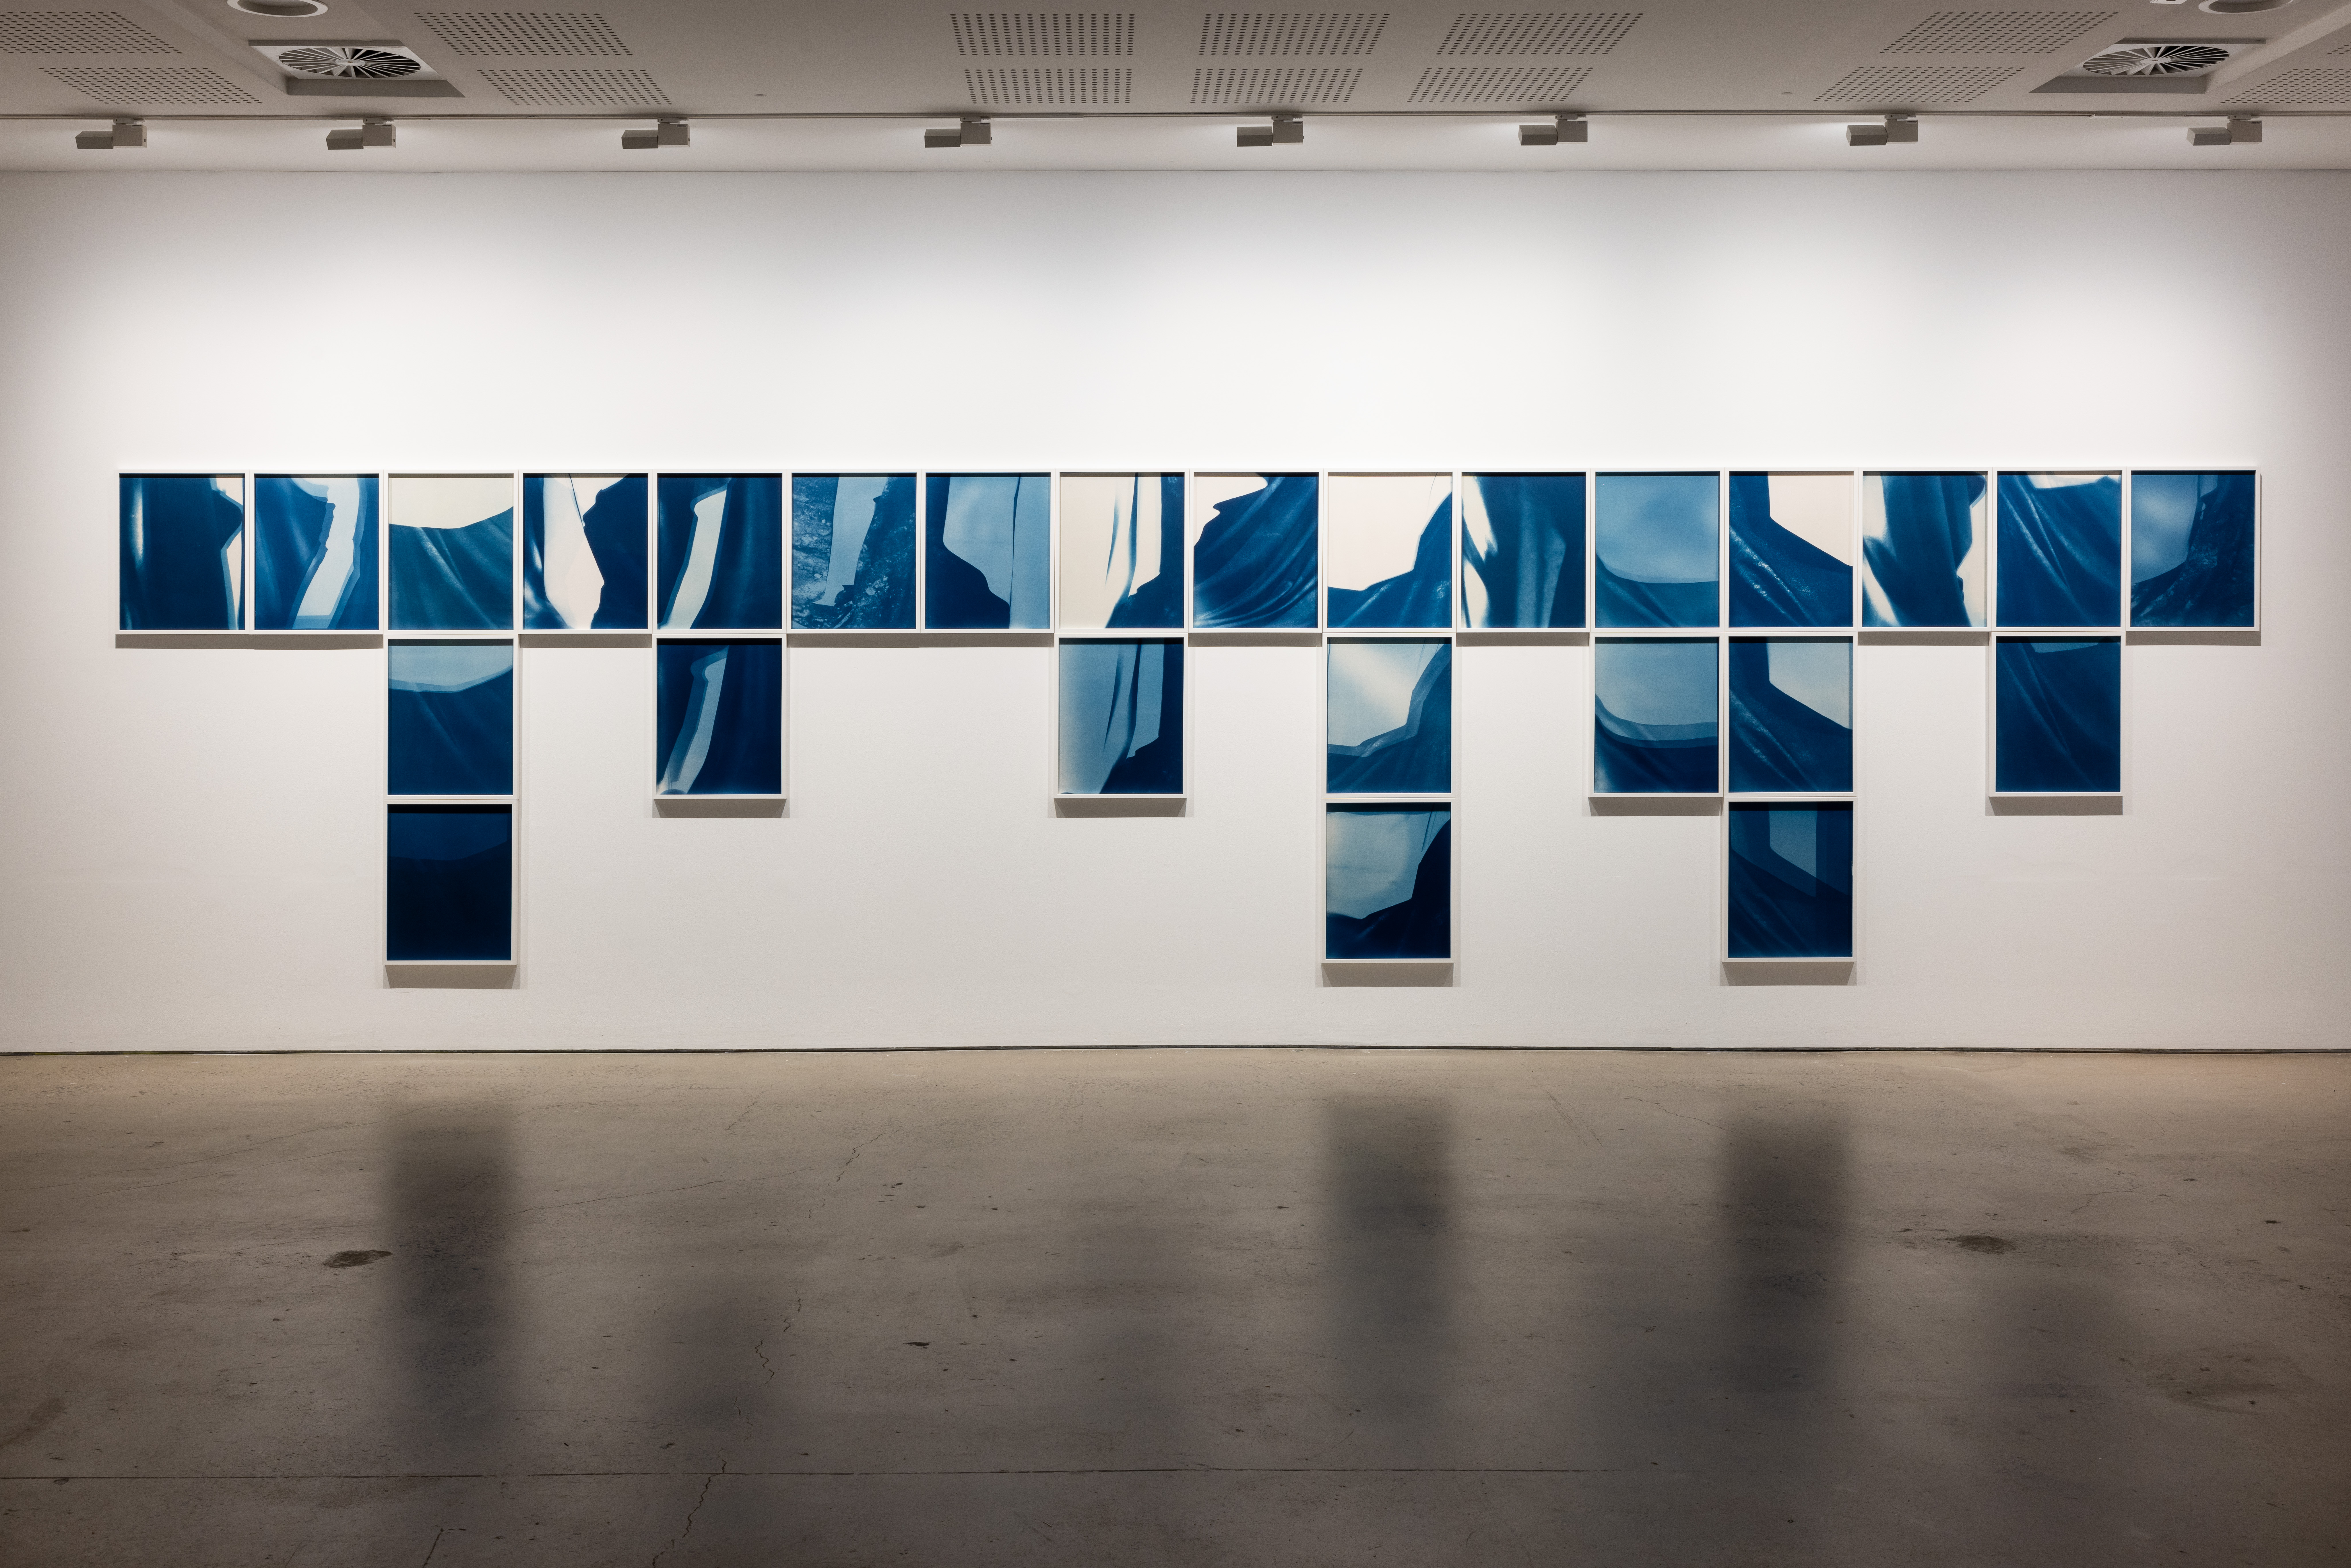 Installation view. Izabela Pluta, 26 Variations from Blue Spectrum and Descent (2020), cyanotypes on watercolour paper, UNSW Galleries, Sydney, 2022. Image courtesy the artist, UNSW Galleries and Gallery Sally-Dan Cuthbert. Photo: Daniel Boud.